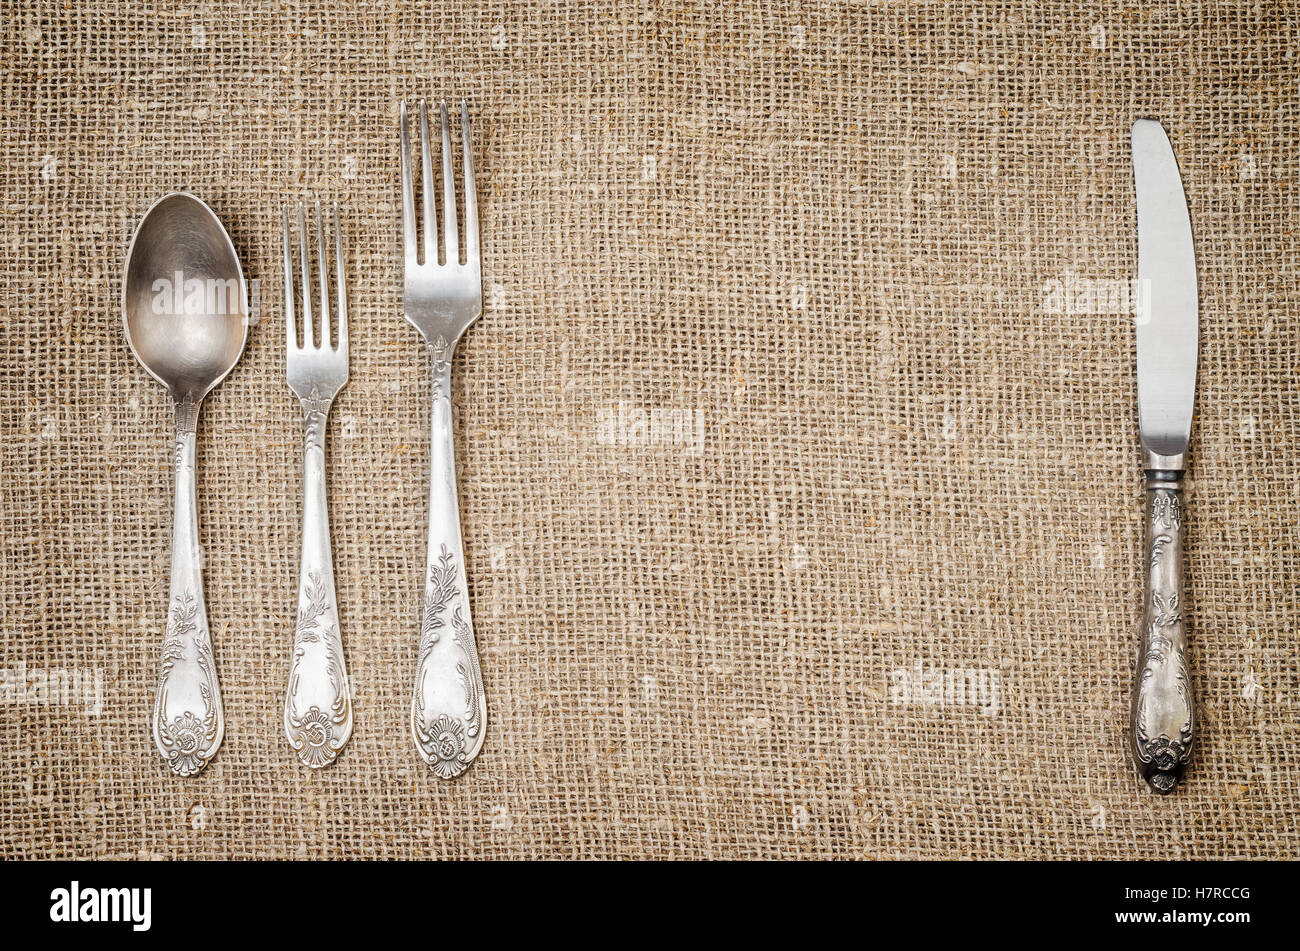 Rustic jute background with vintage silver fork spoon and knife. Stock Photo